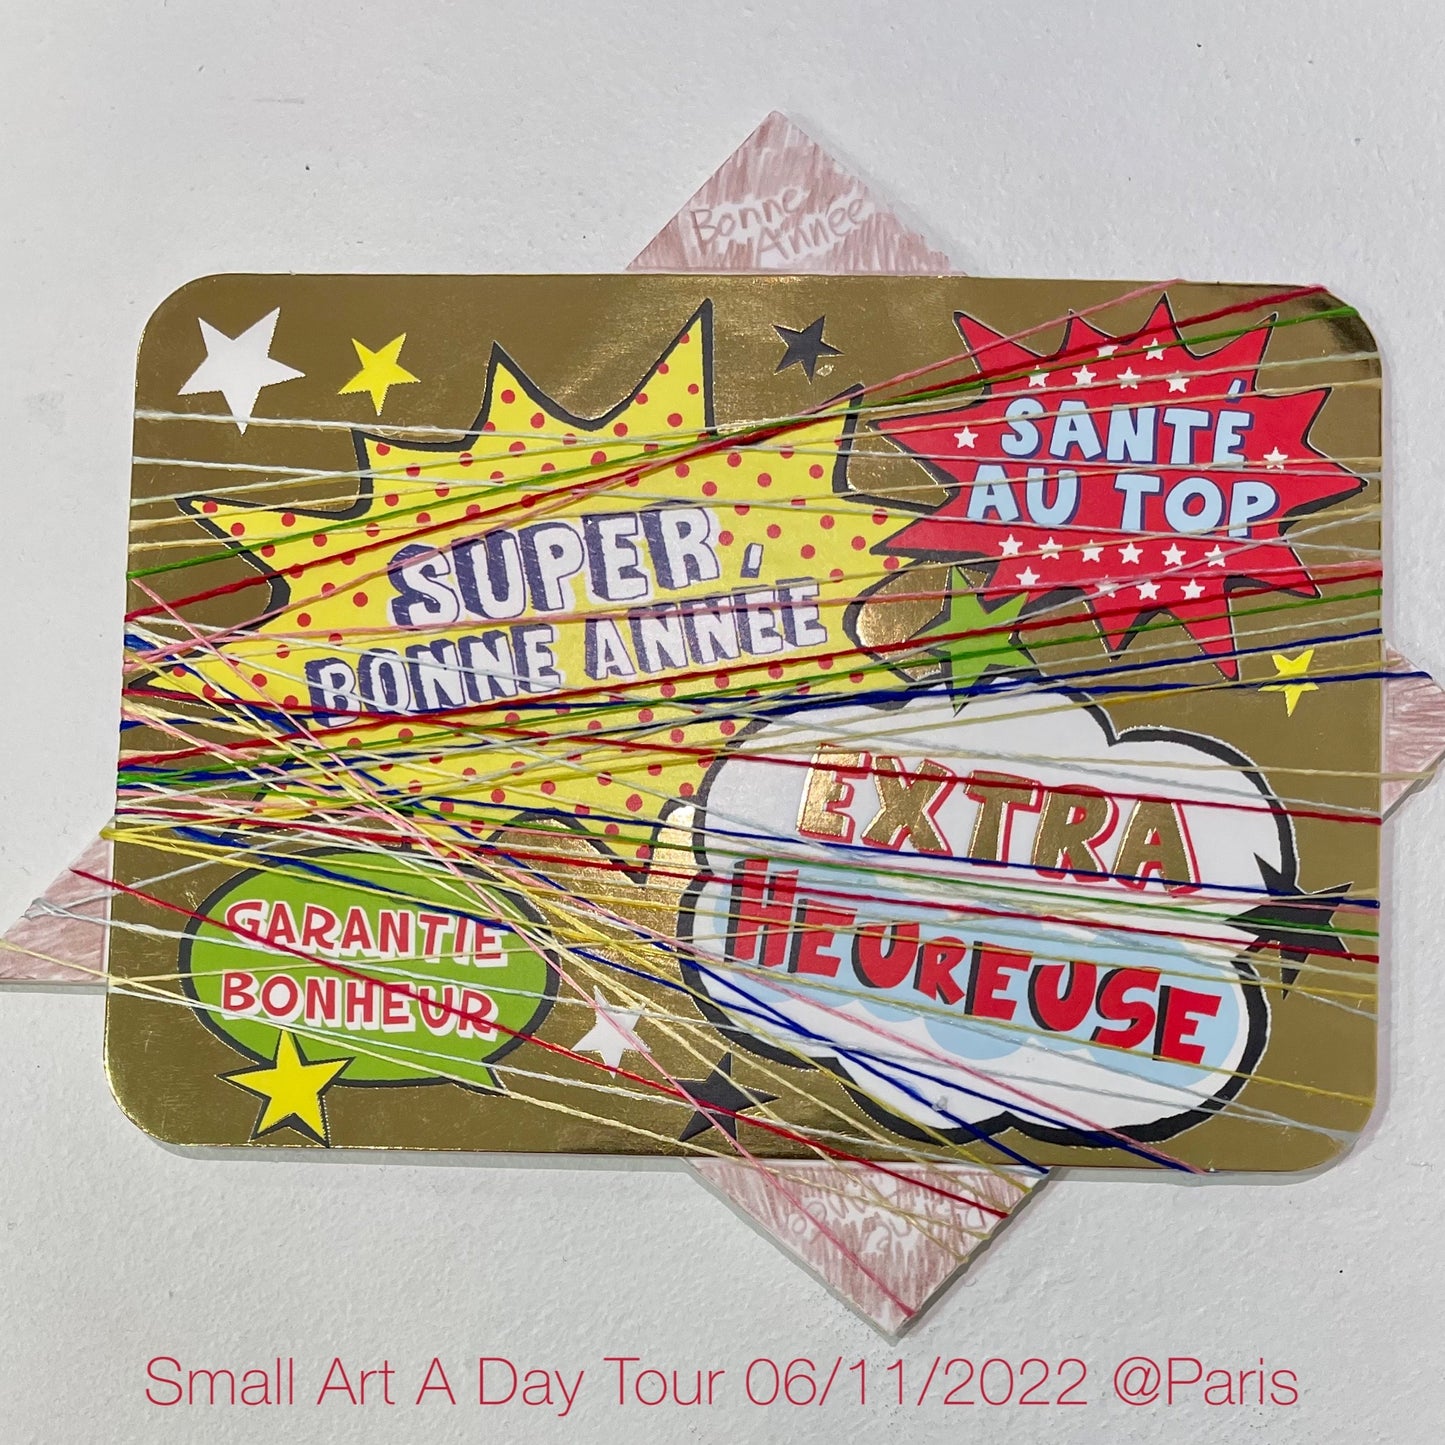 Small Art a Day Tour -in Paris 2022/11/06-